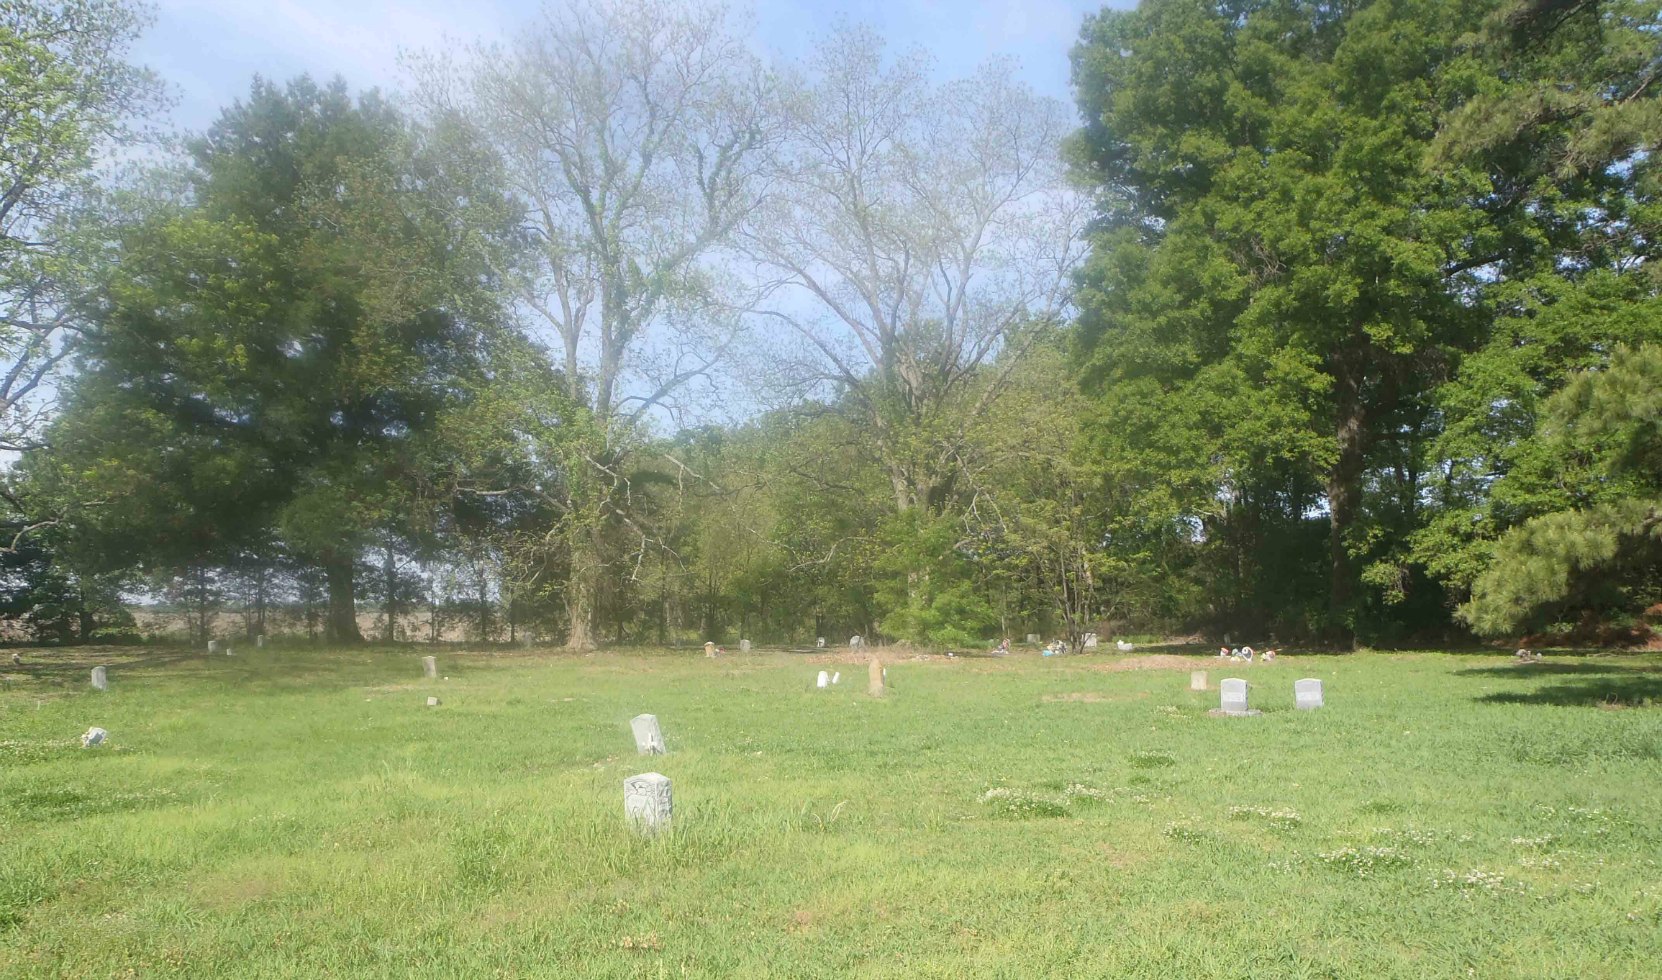 Little Zion Missionary Baptist Church cemetery, near Money, Leflore County, Mississippi, site of one of three reputed Robert Johnson grave sites. The Robert Johnson grave is beneath the two large pecan trees in the middle of this photo.